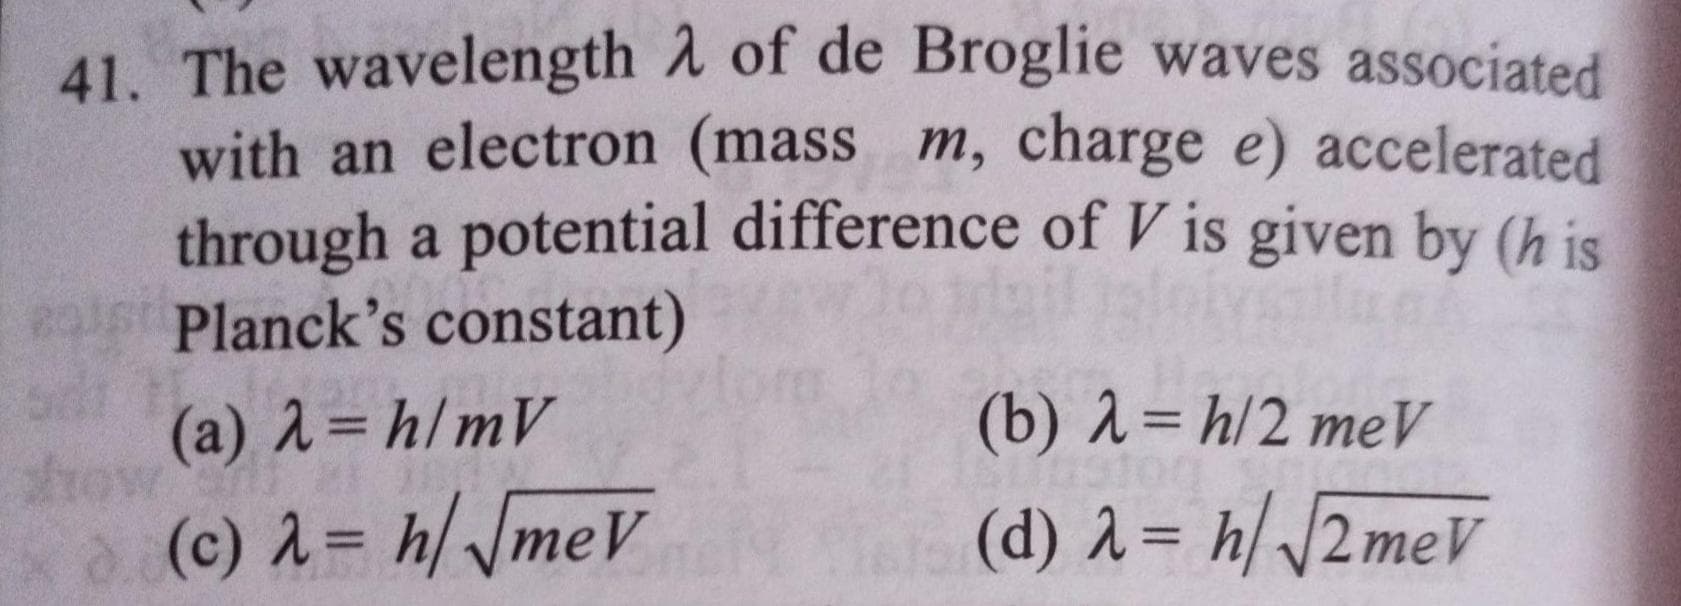 41. The wavelength A of de Broglie waves associated
with an electron (mass m, charge e) accelerated
through a potential difference of V is given by (h is
Planck's constant)
(a) 2= h/mV
(b) 1= h/2 me
(c) 2= h/ JmeV
(d) 2= h//2meV
%3D
%3D
